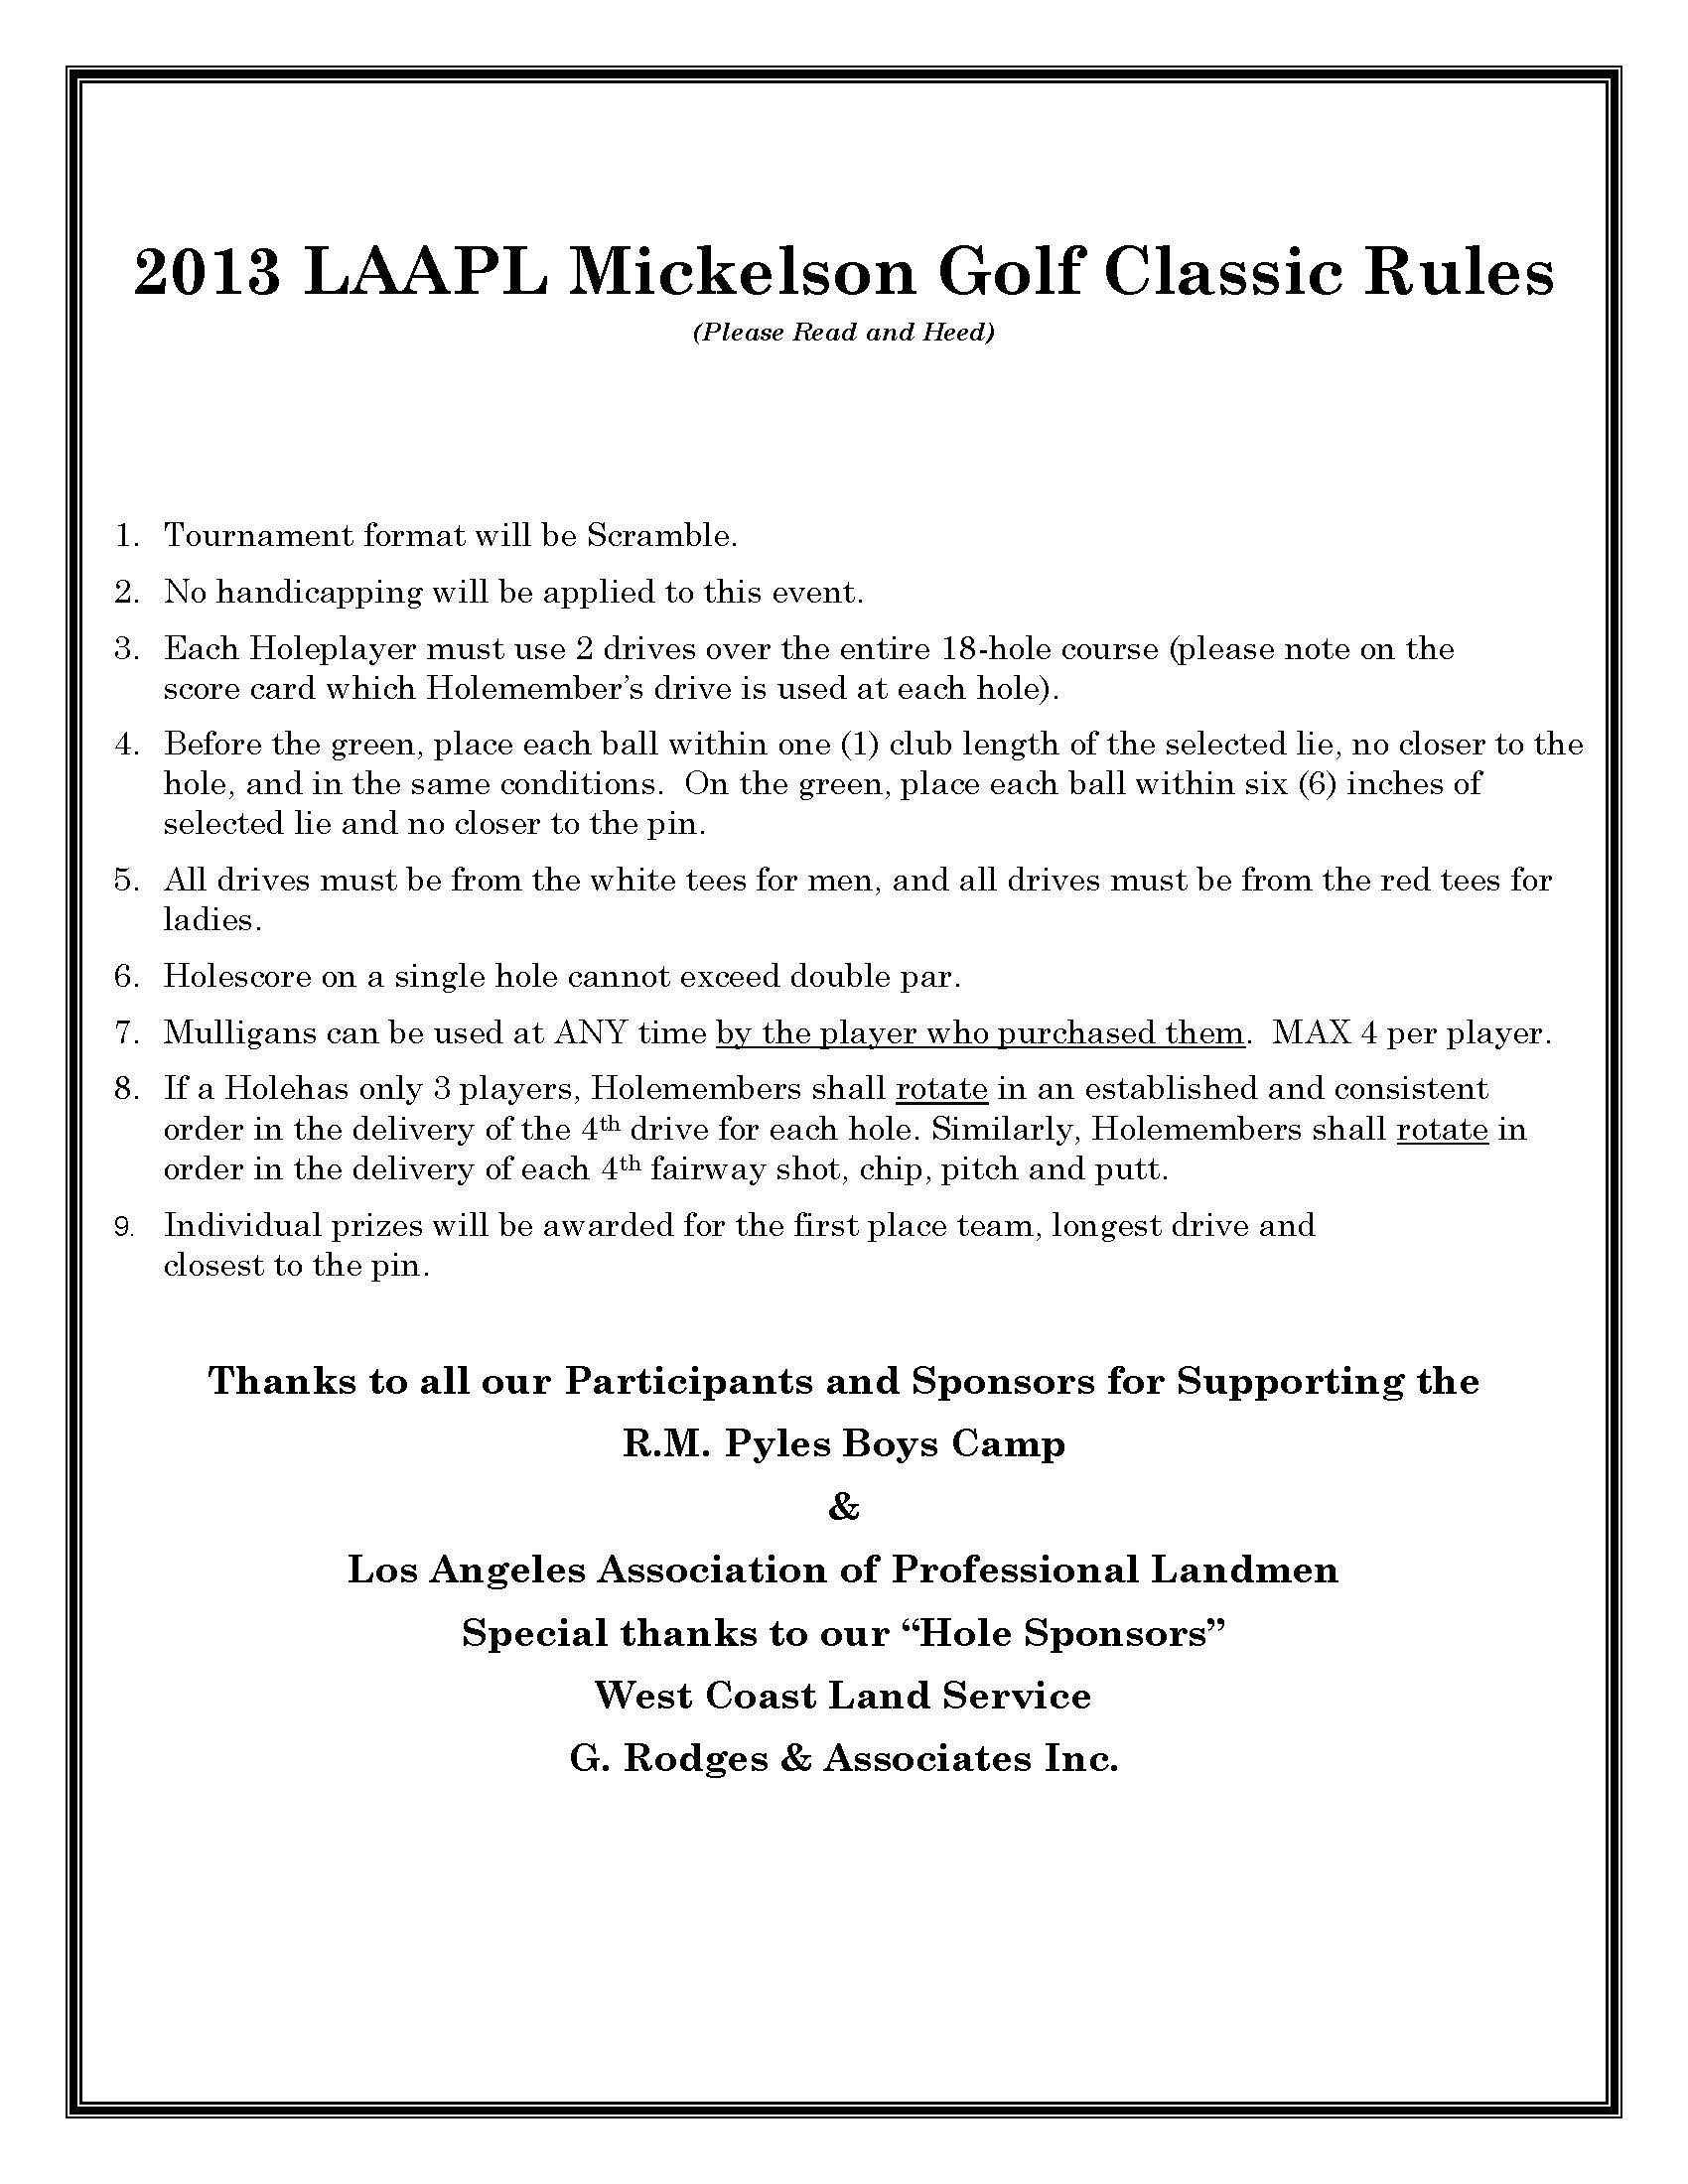 Mickelson Golf Aug 2nd 2013 Program_Page_17.jpg